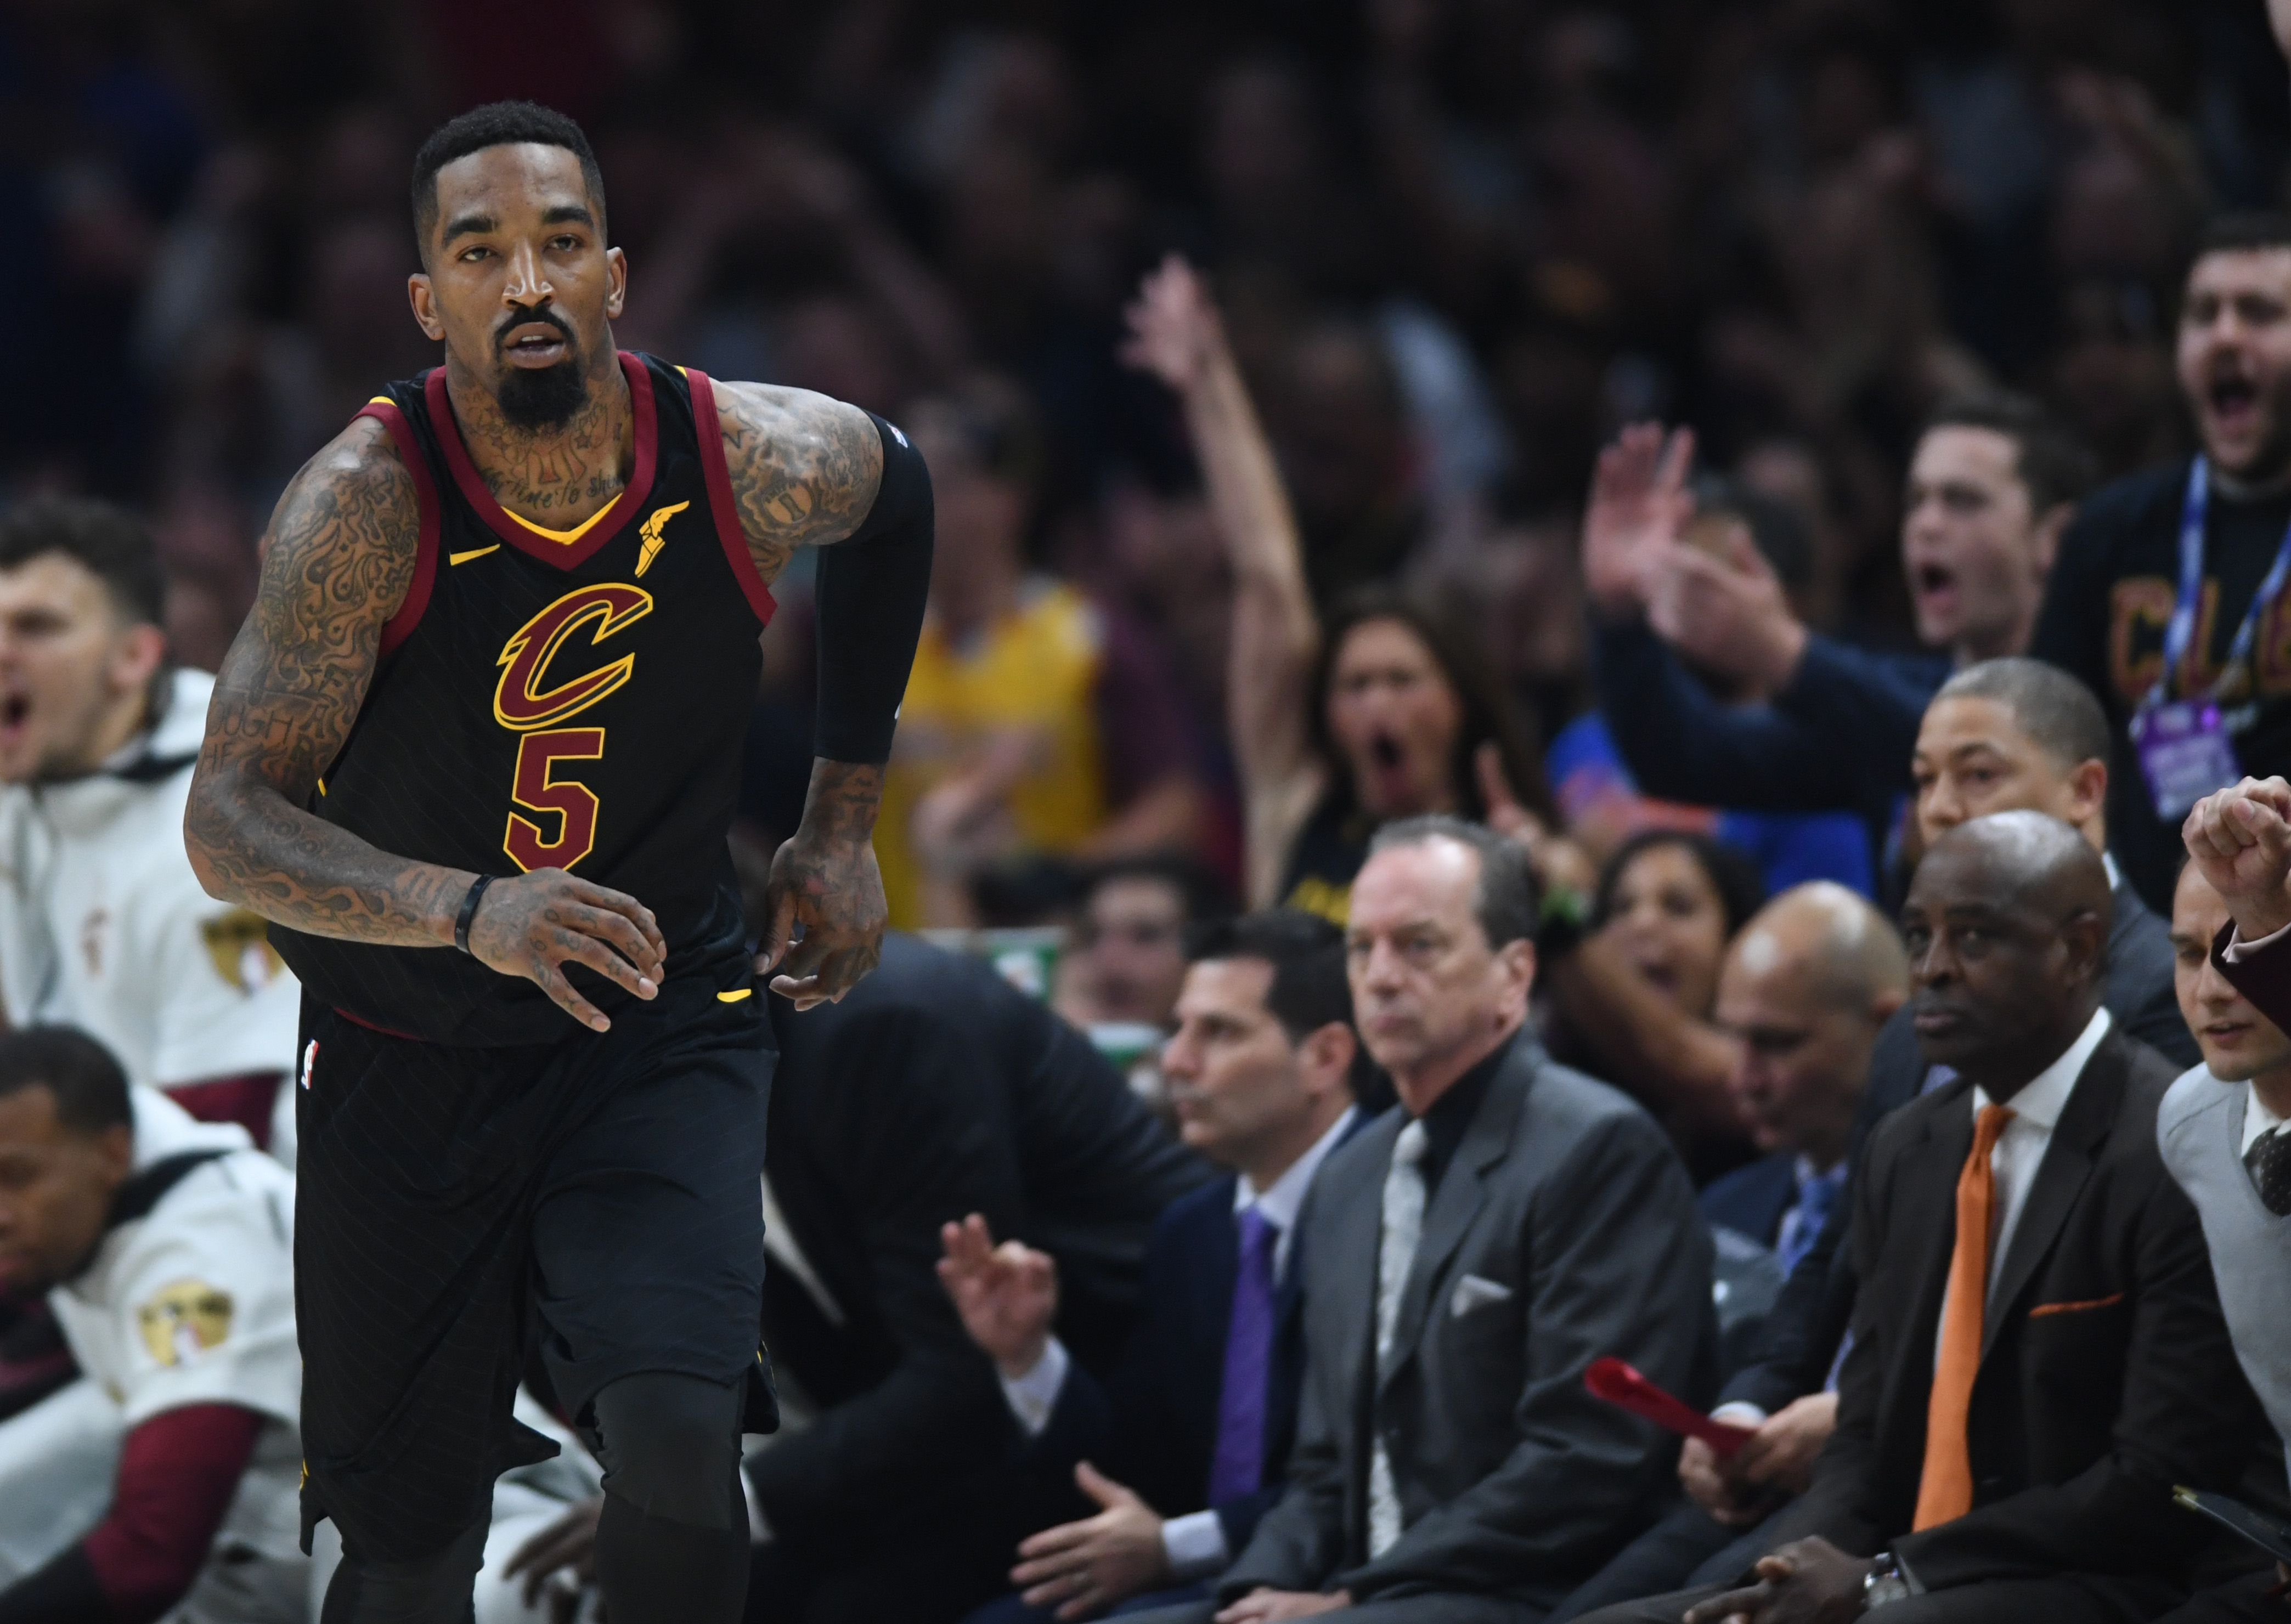 JR Smith’s jersey from Game 1 of NBA Finals up for bid, fetching high